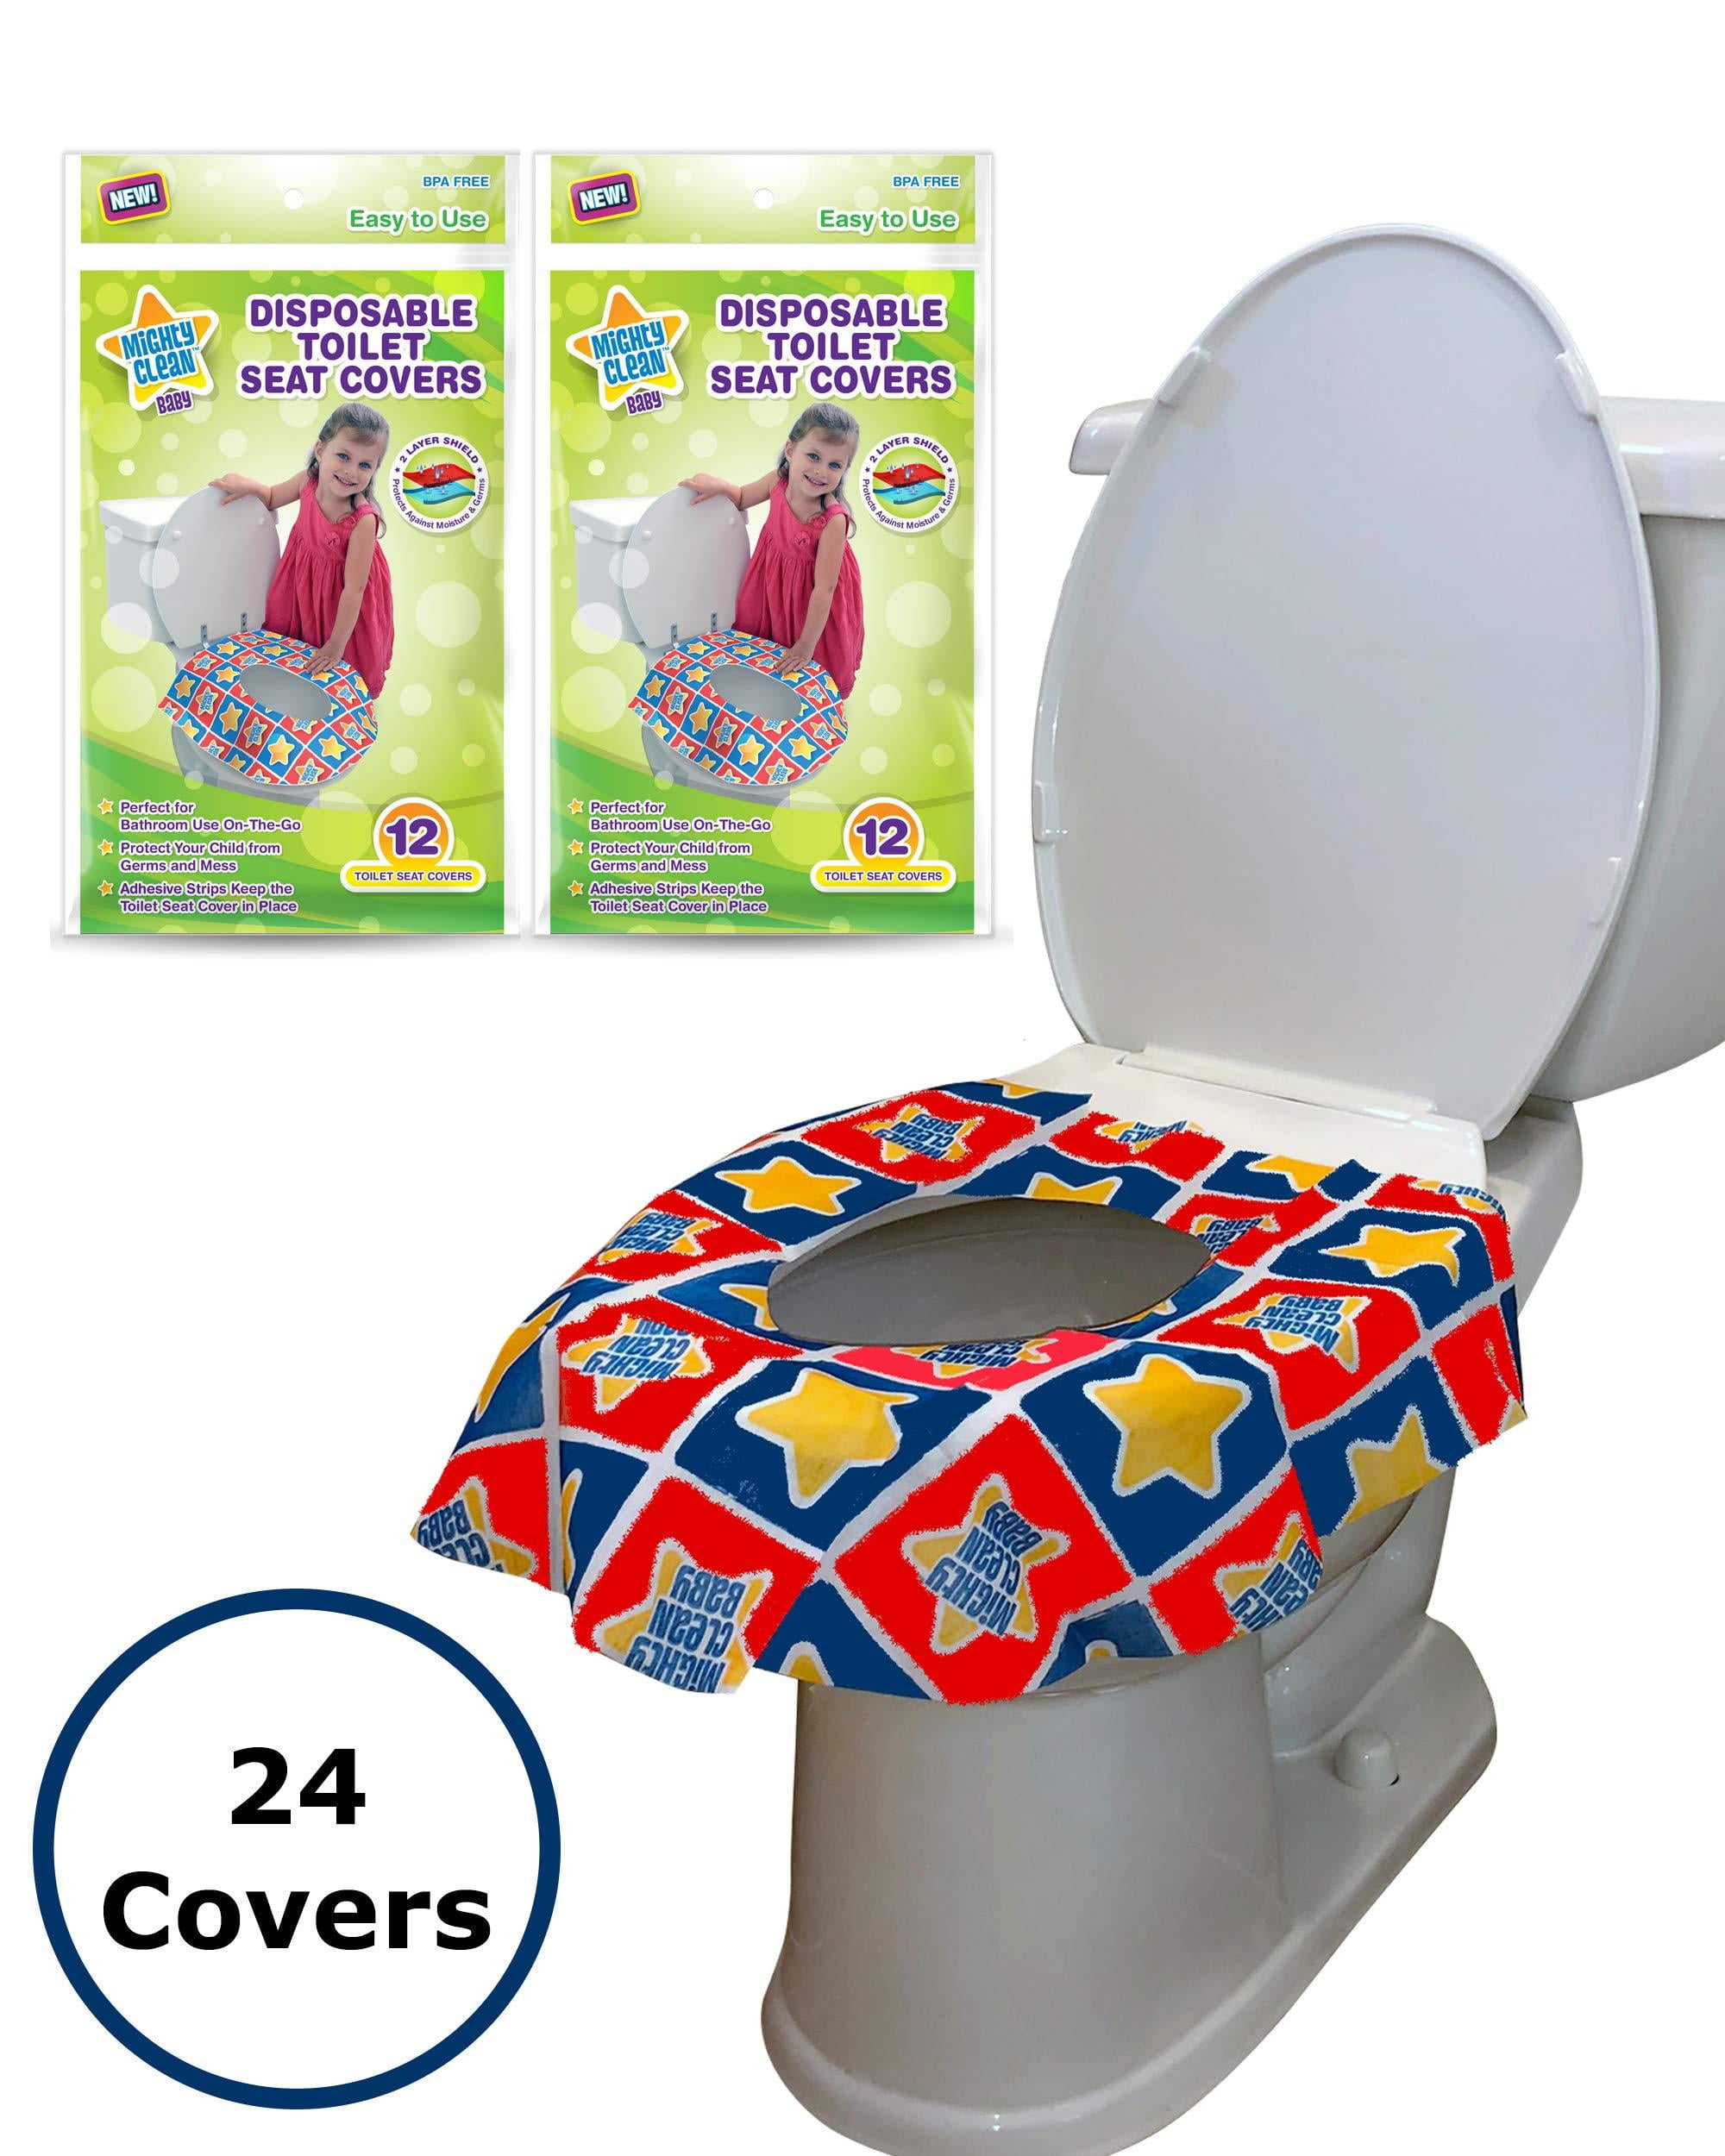 Lightweight Toilet Seat Cover for Travel Disposable Flushable Porta Potty Train 